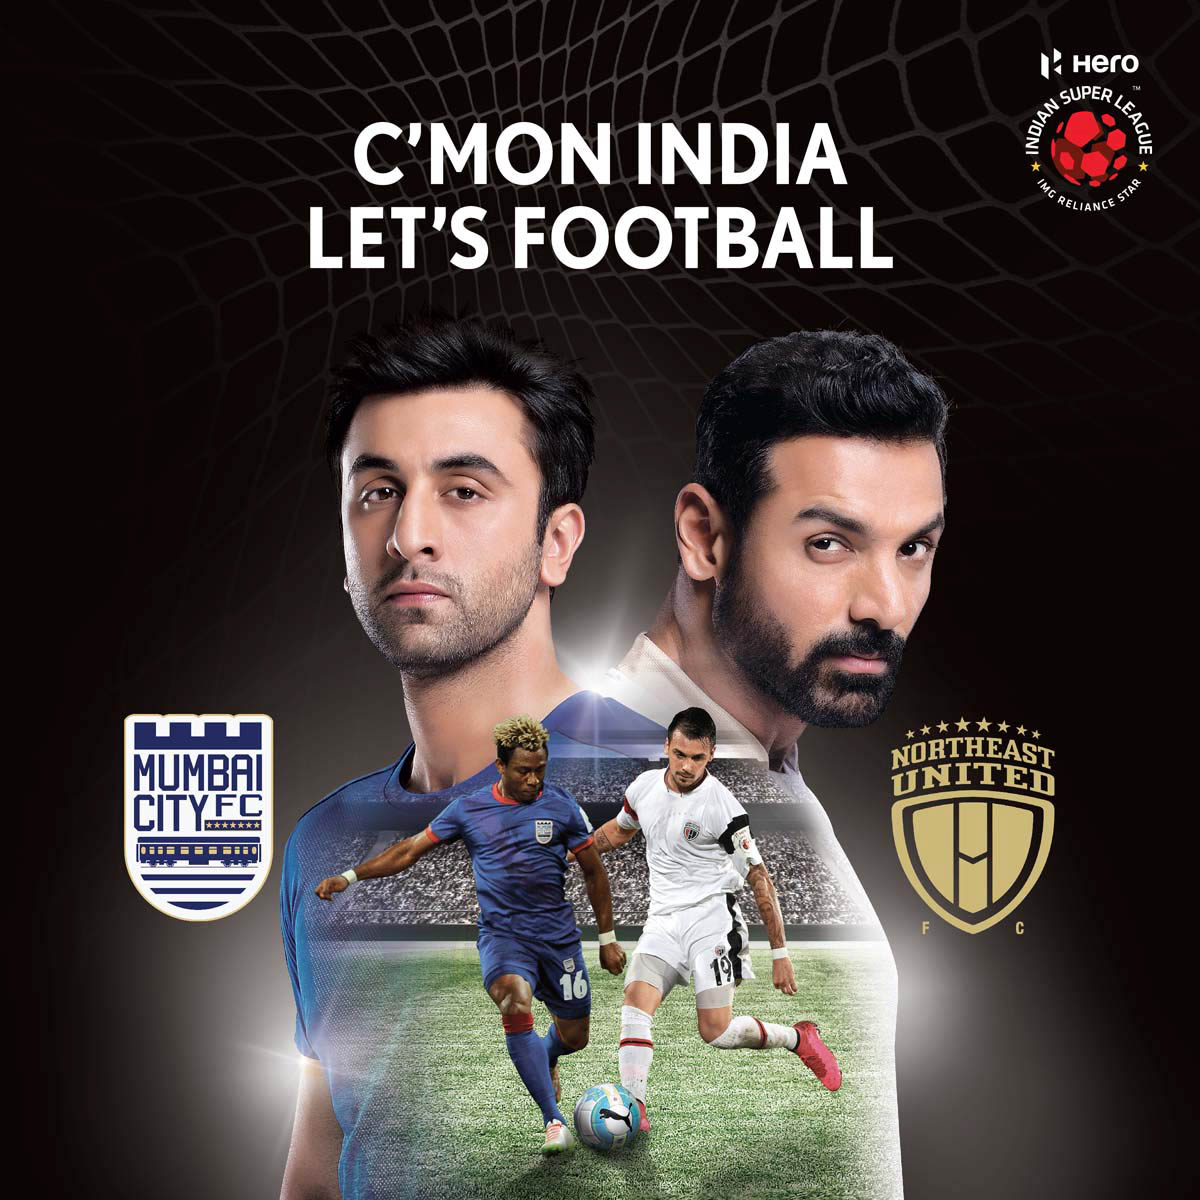 Indian Super League, Football League,Sport Photography, Crickerter Photoshoot, Shooting with Celebrity, Sport Photographer, Passionate, Commissioned Photography, Best Advertising Photographer by Vikram Bawa, Mumbai, India